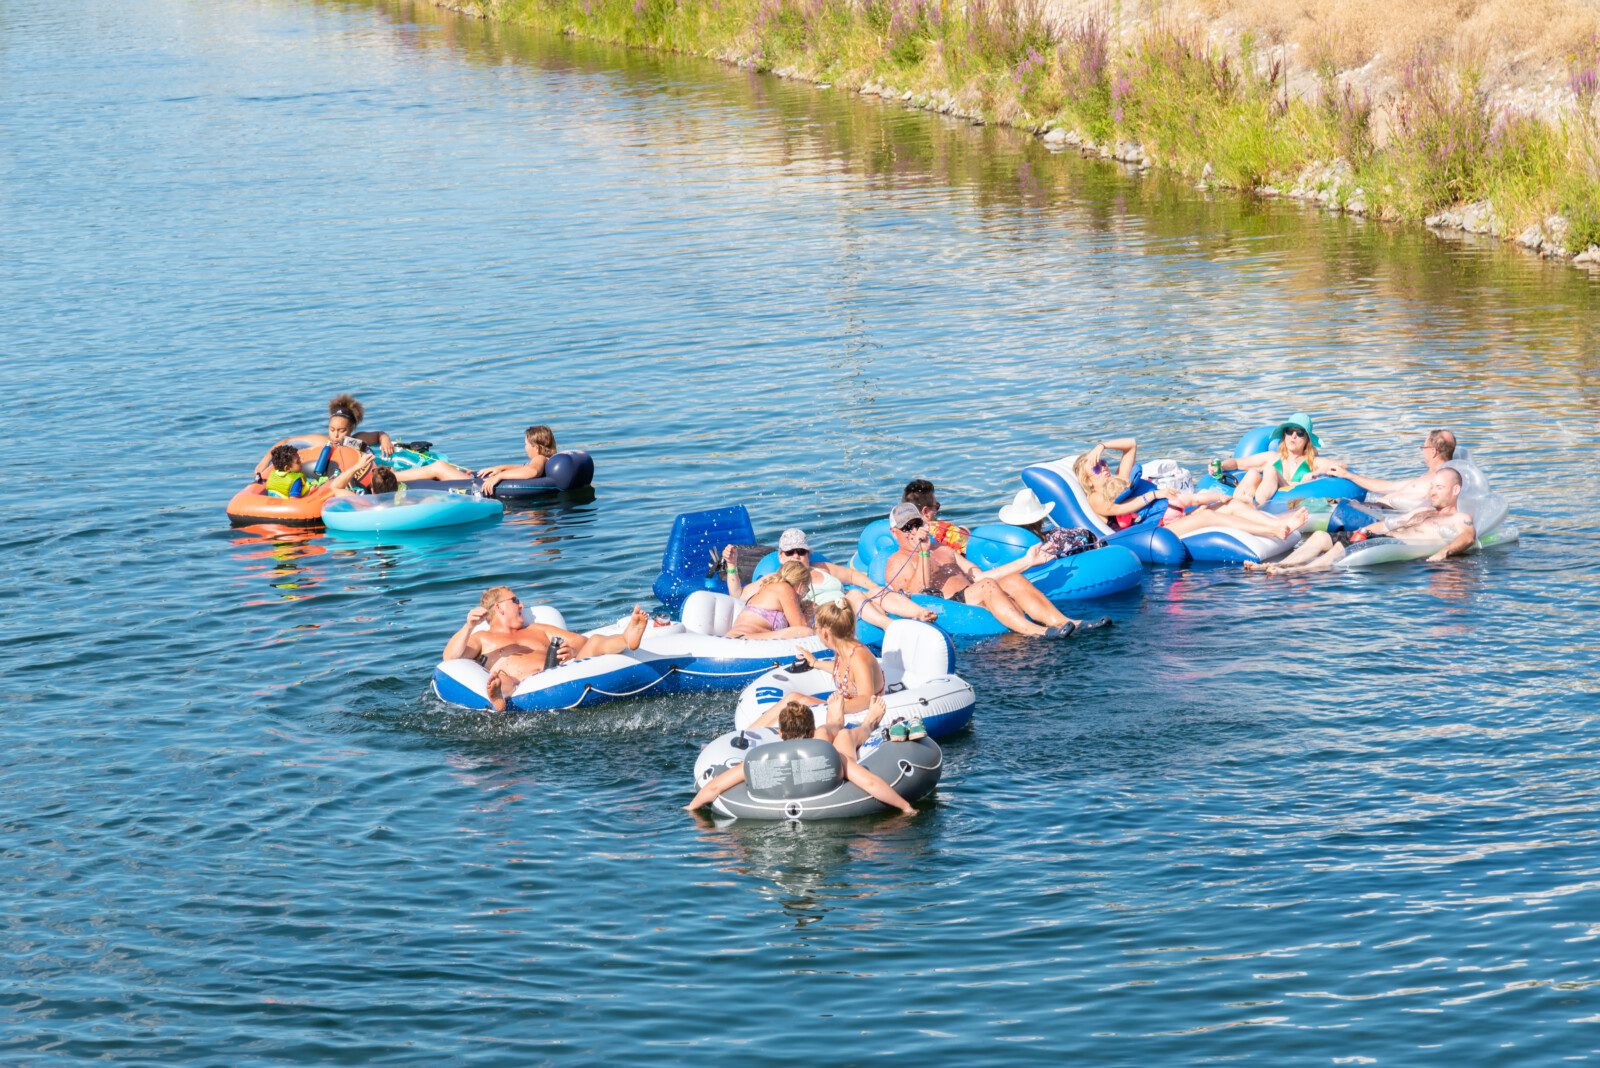 Penticton, British Columbia/Canada - September 1, 2019: a group of friends float down the Penticton River Channel together on a hot day, a popular summer activity.